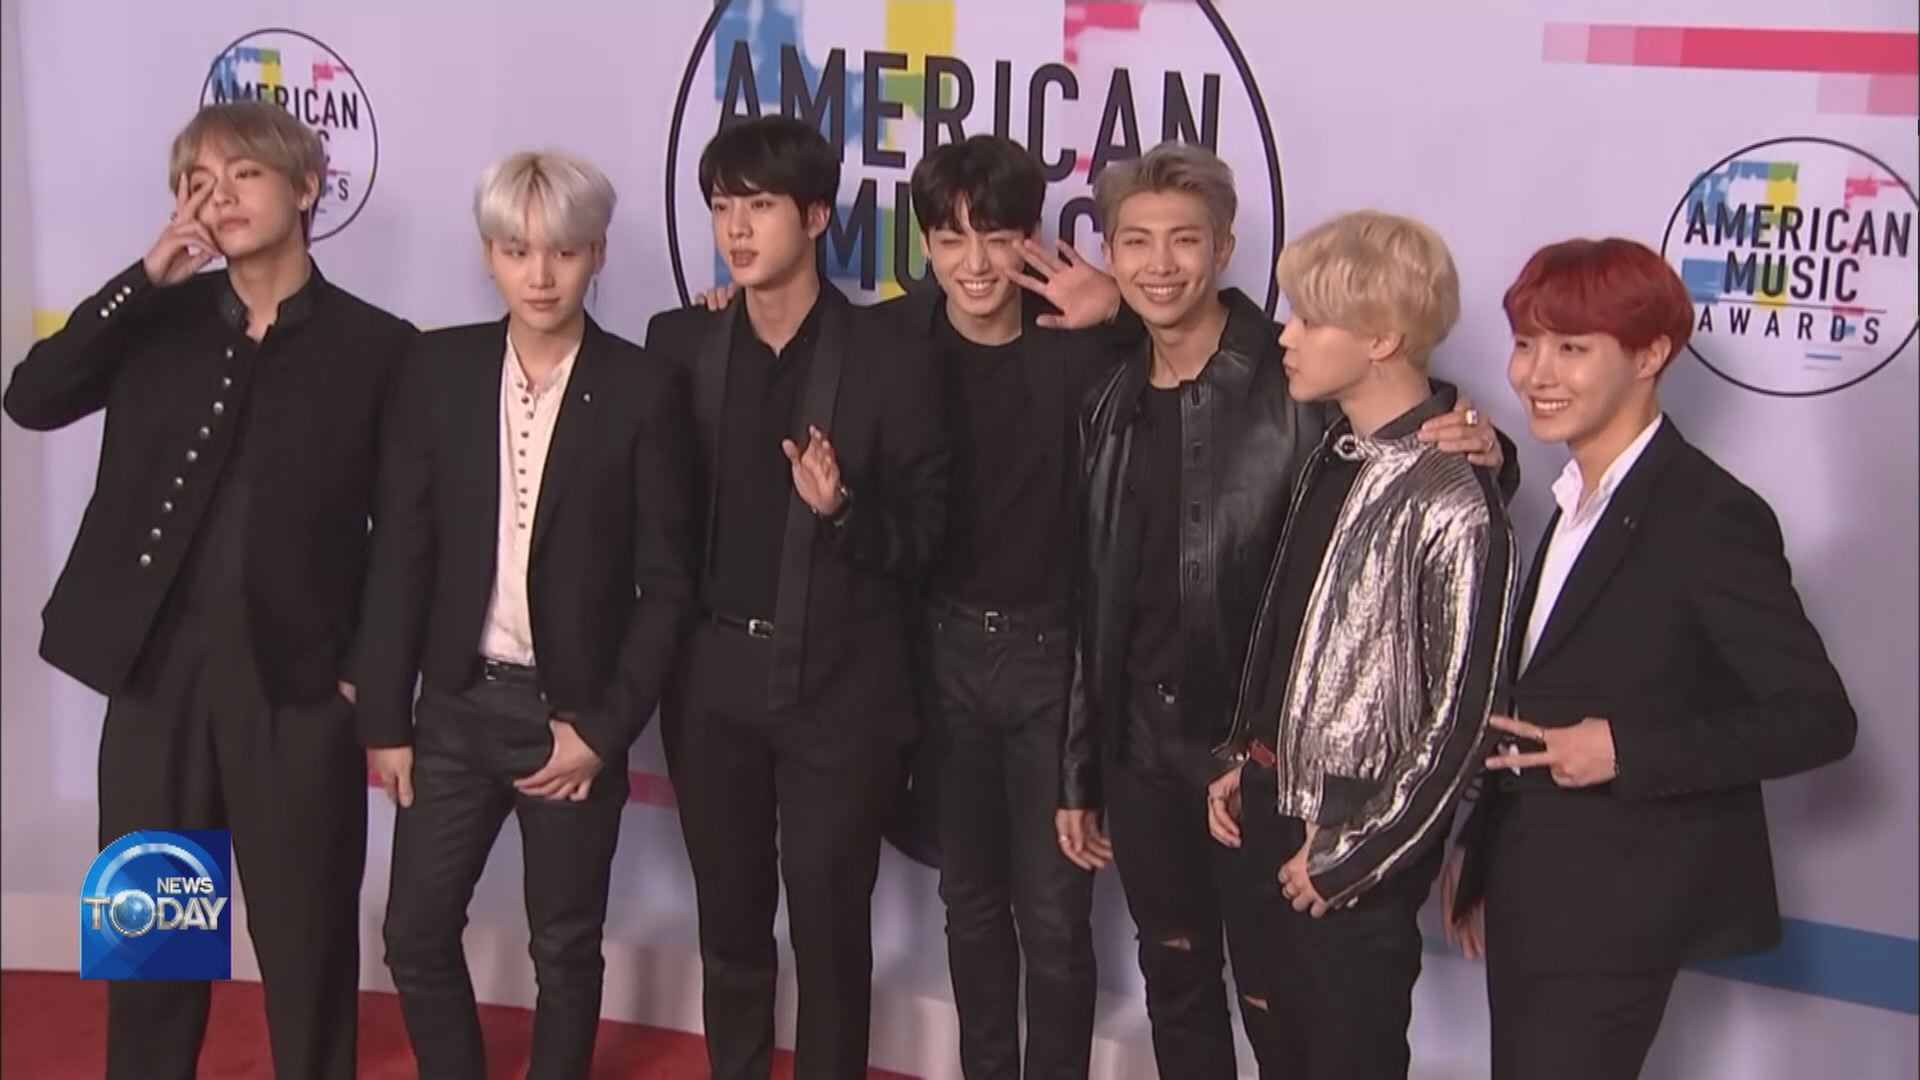 BTS NOMINATED FOR AMERICAN MUSIC AWARDS